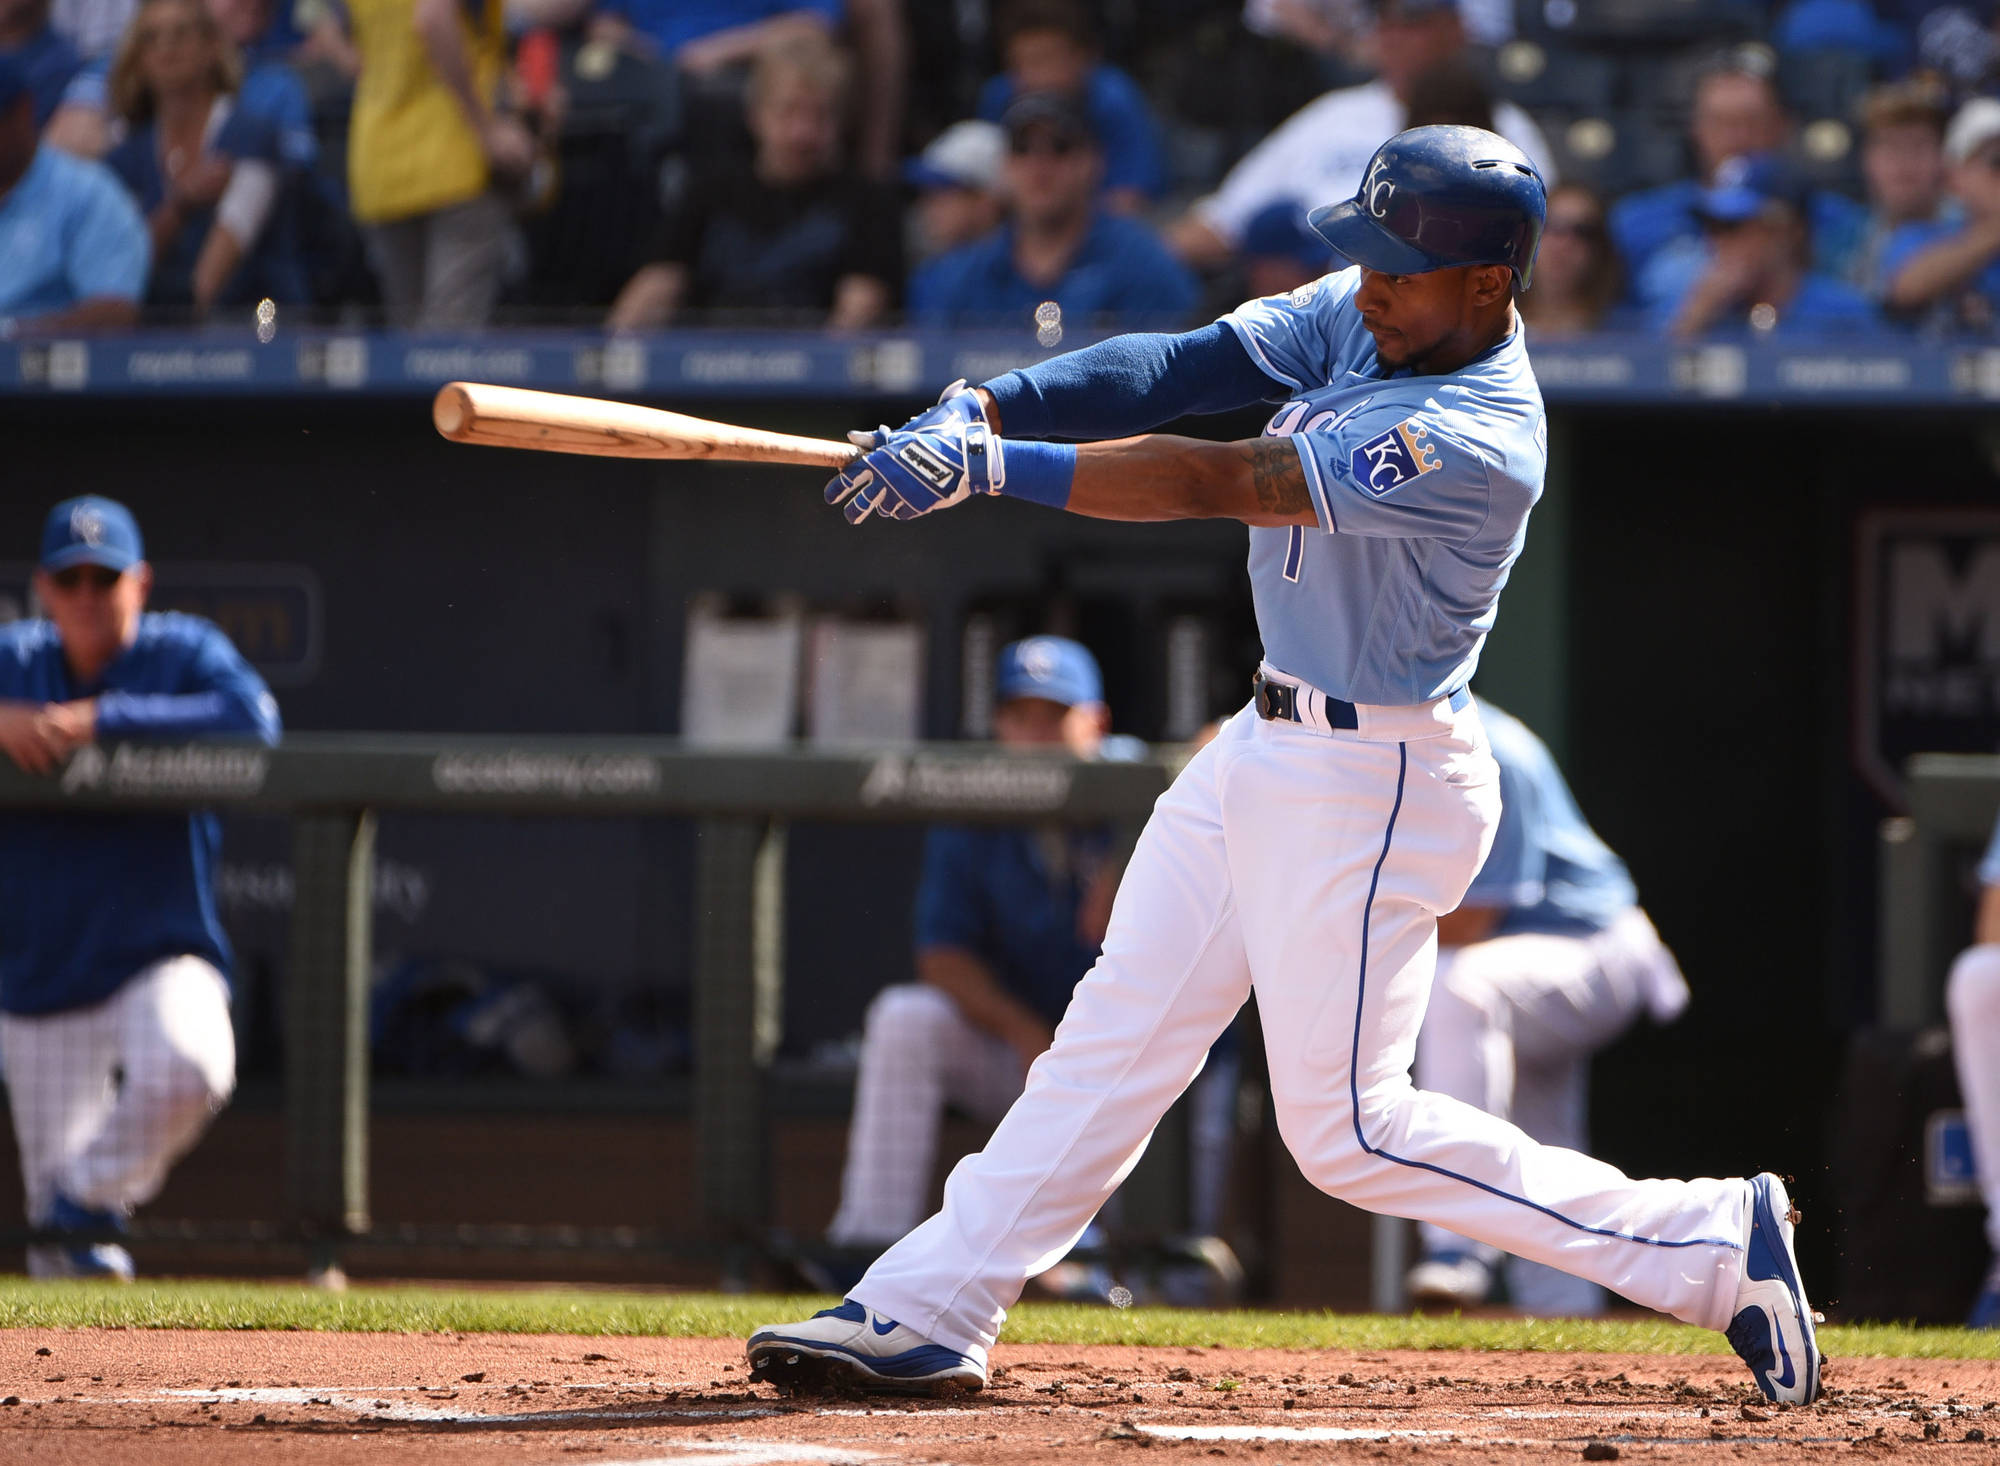 Mariners making moves acquire speedy Jarrod Dyson